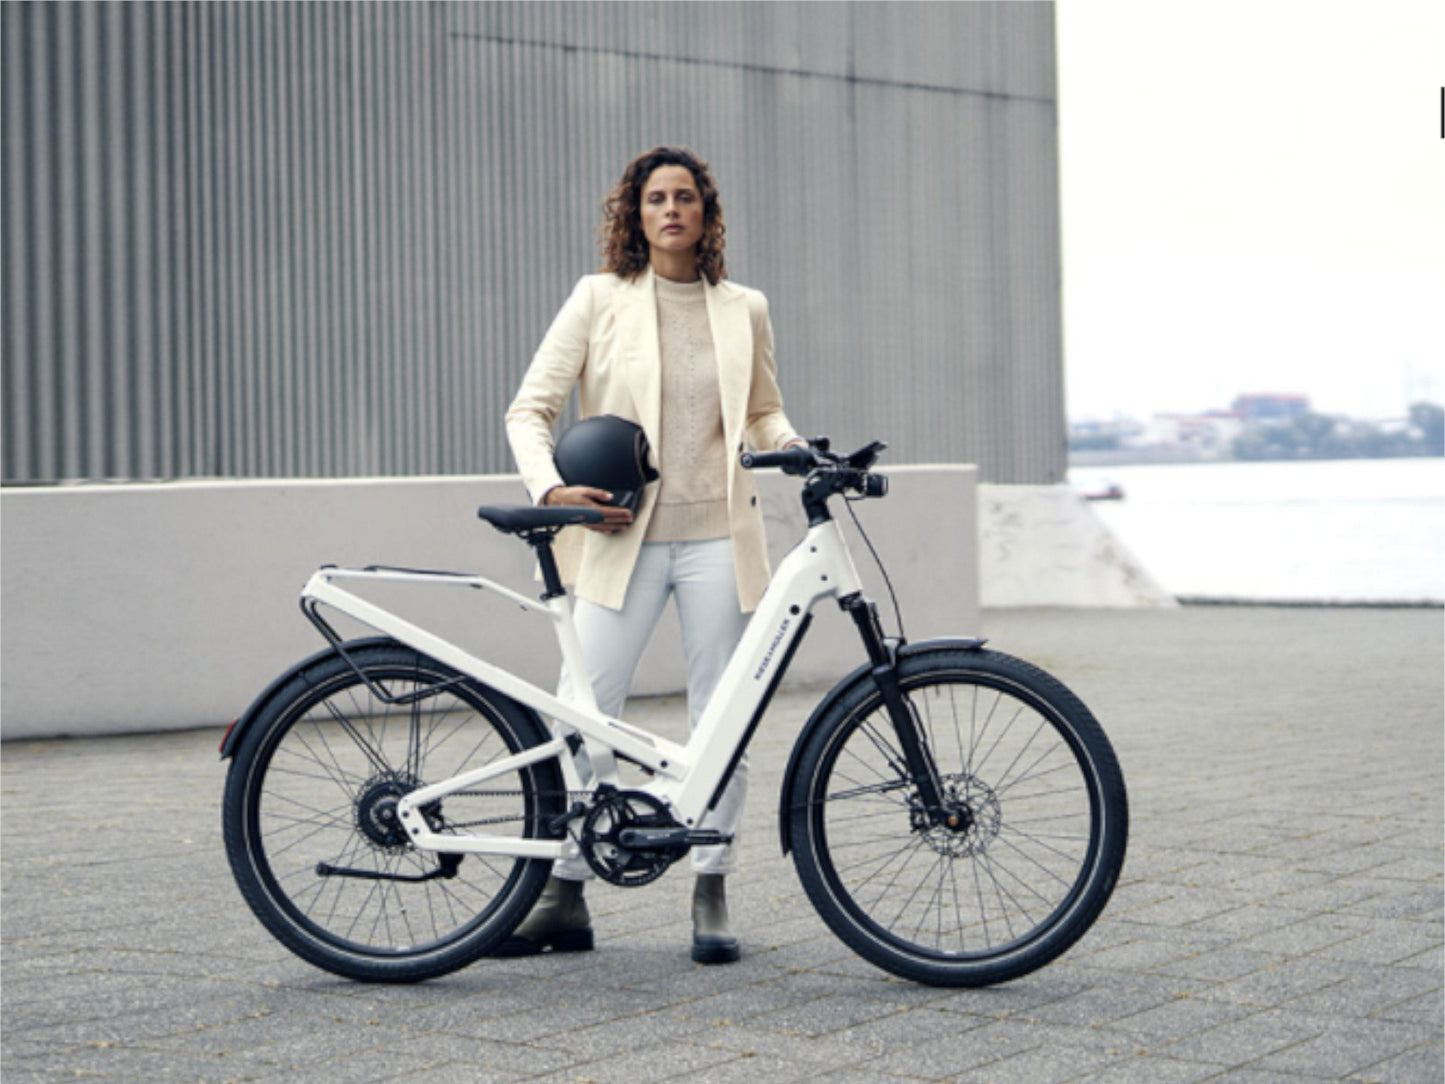 Riese and Muller Homage GT Vario ebike pearl white lady standing with bike